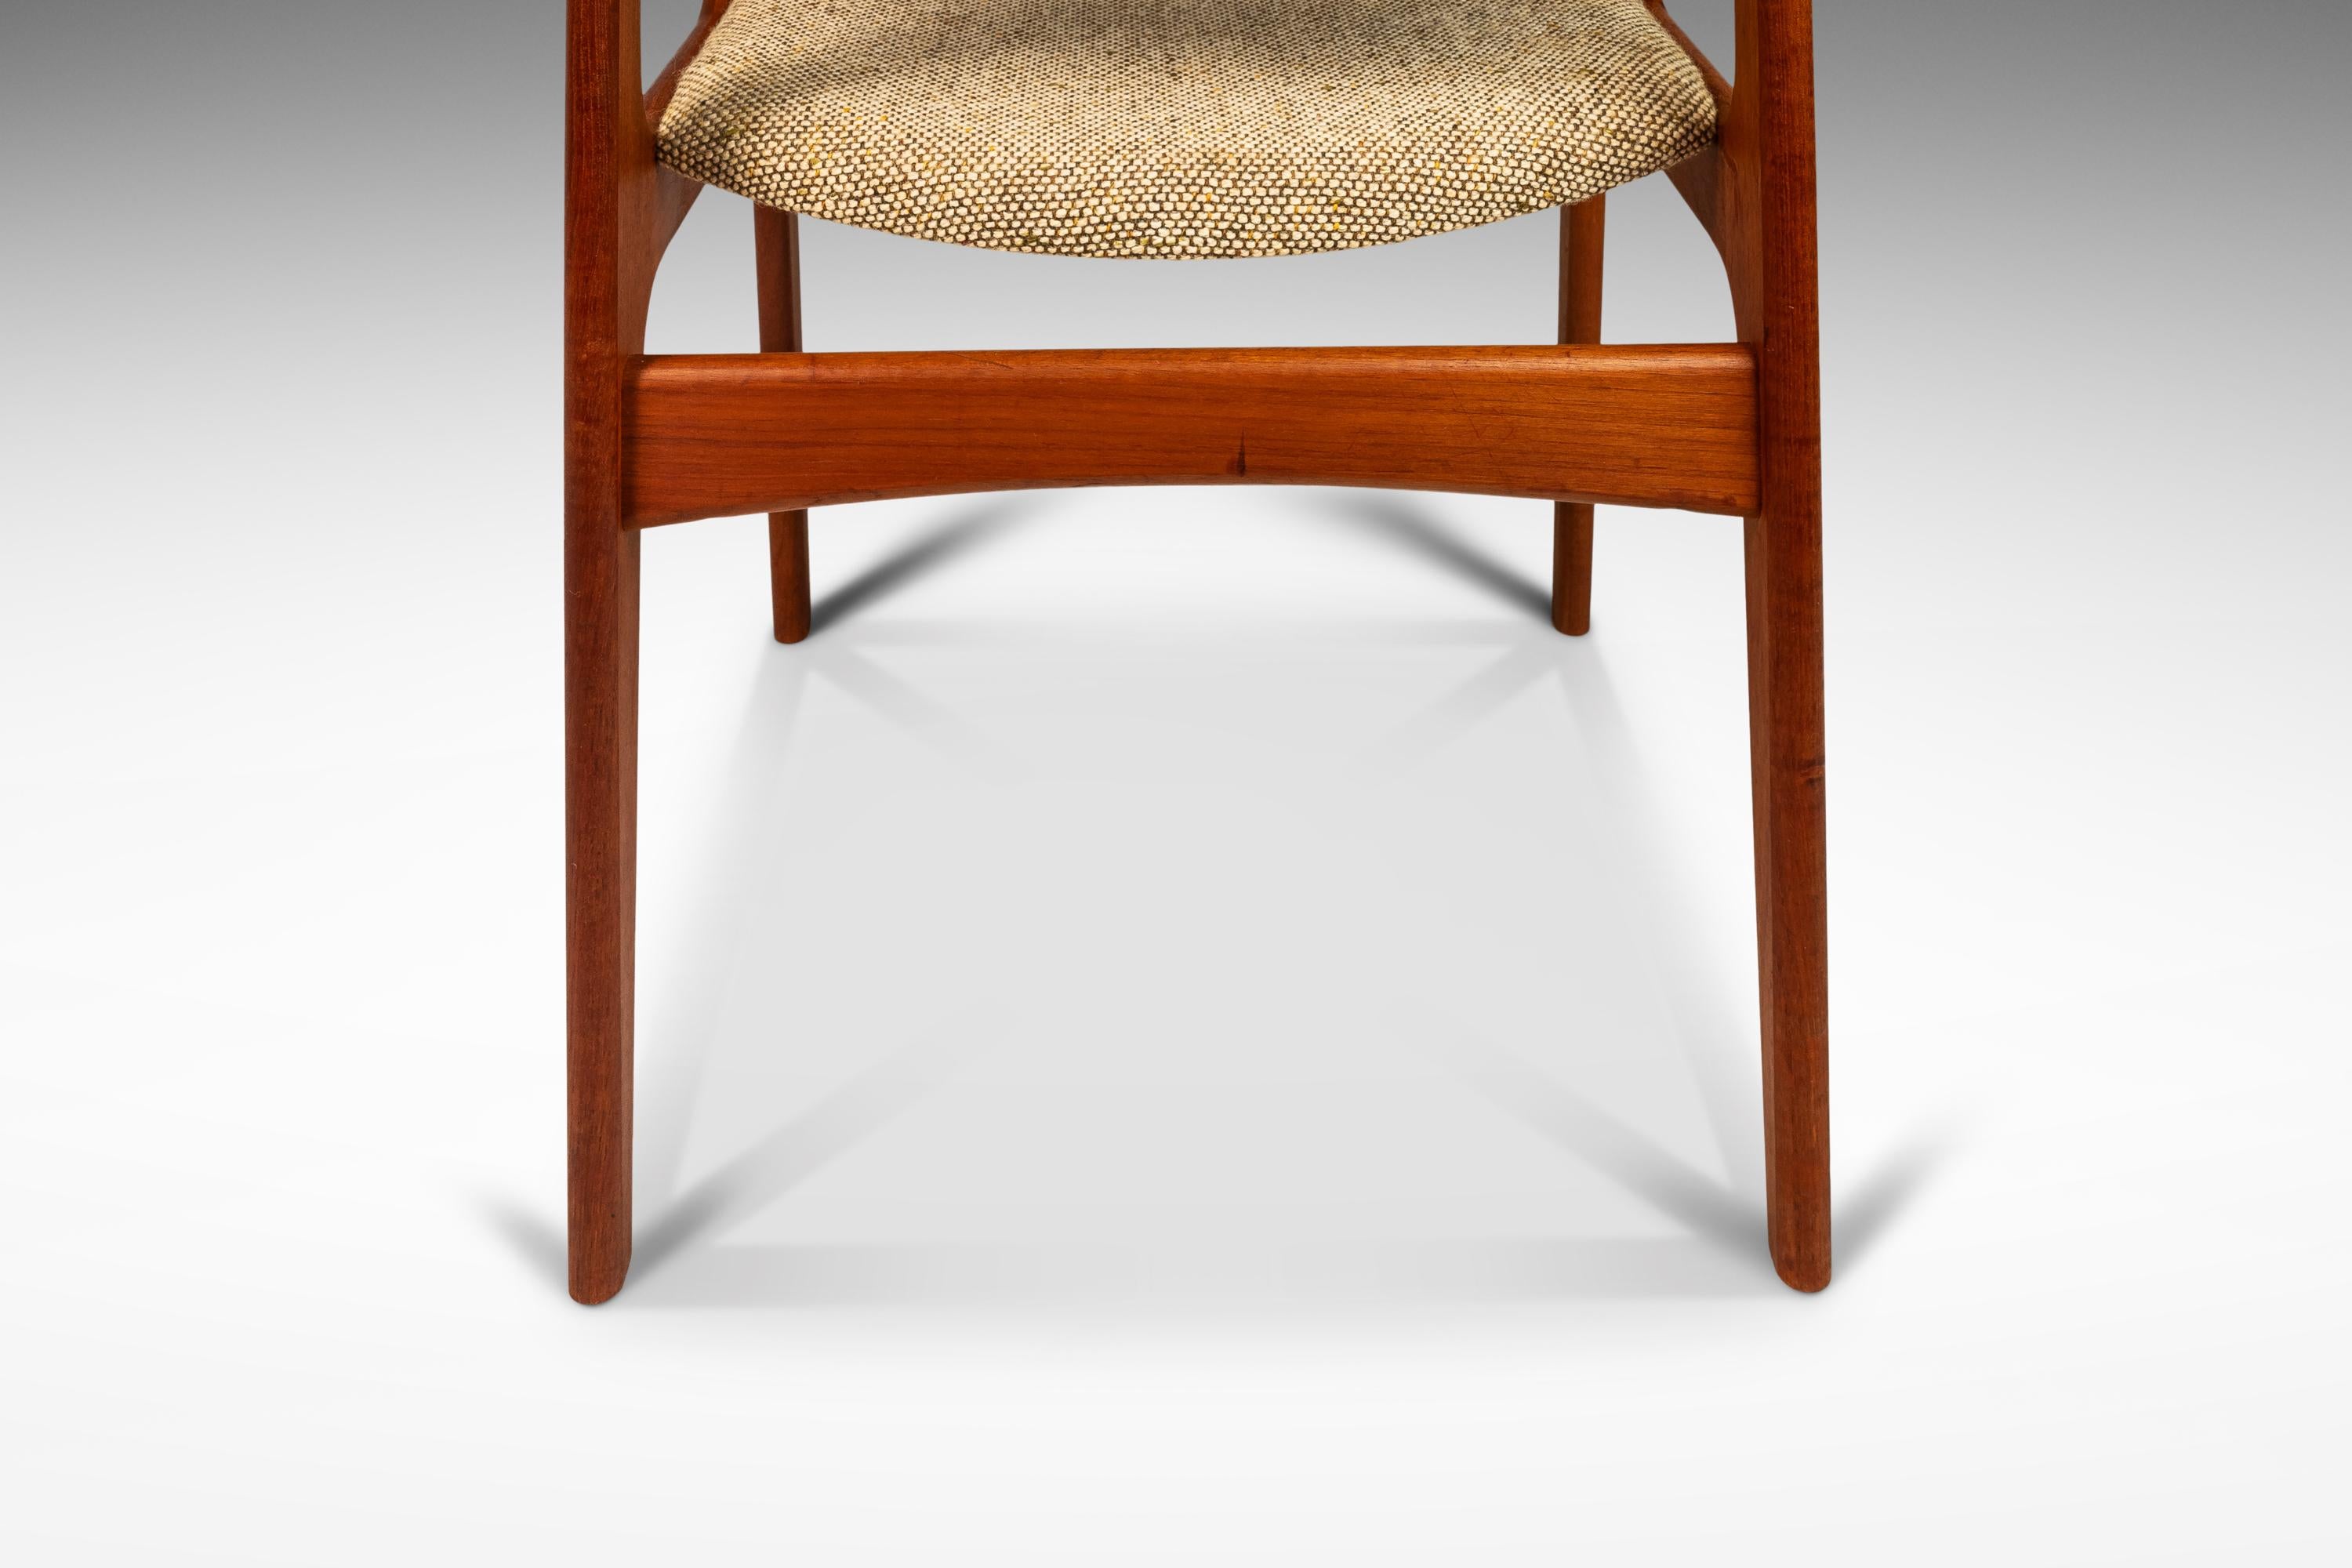 Danish Mid-Century Arm Chair in Solid Teak & Original Fabric by D-Scan, c. 1970s For Sale 7